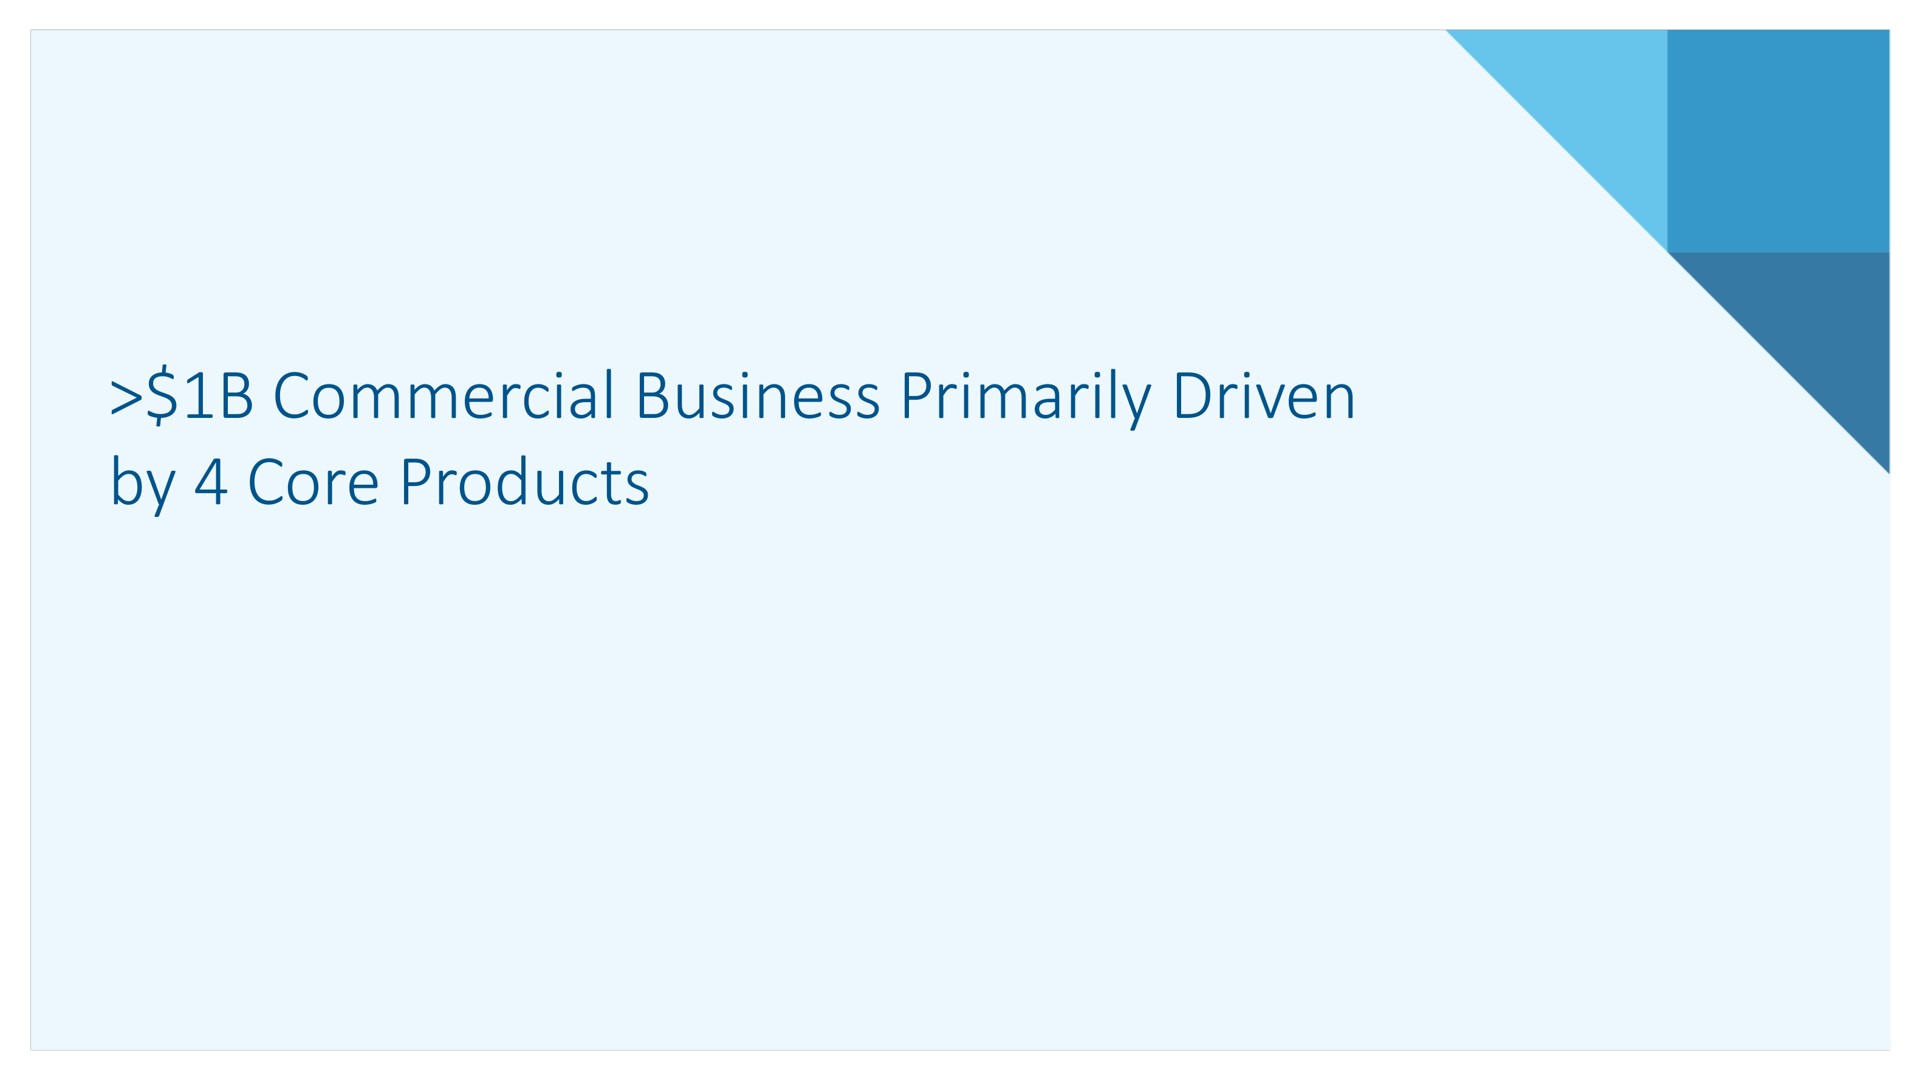 commercial business primarily driven by core products | Alkermes